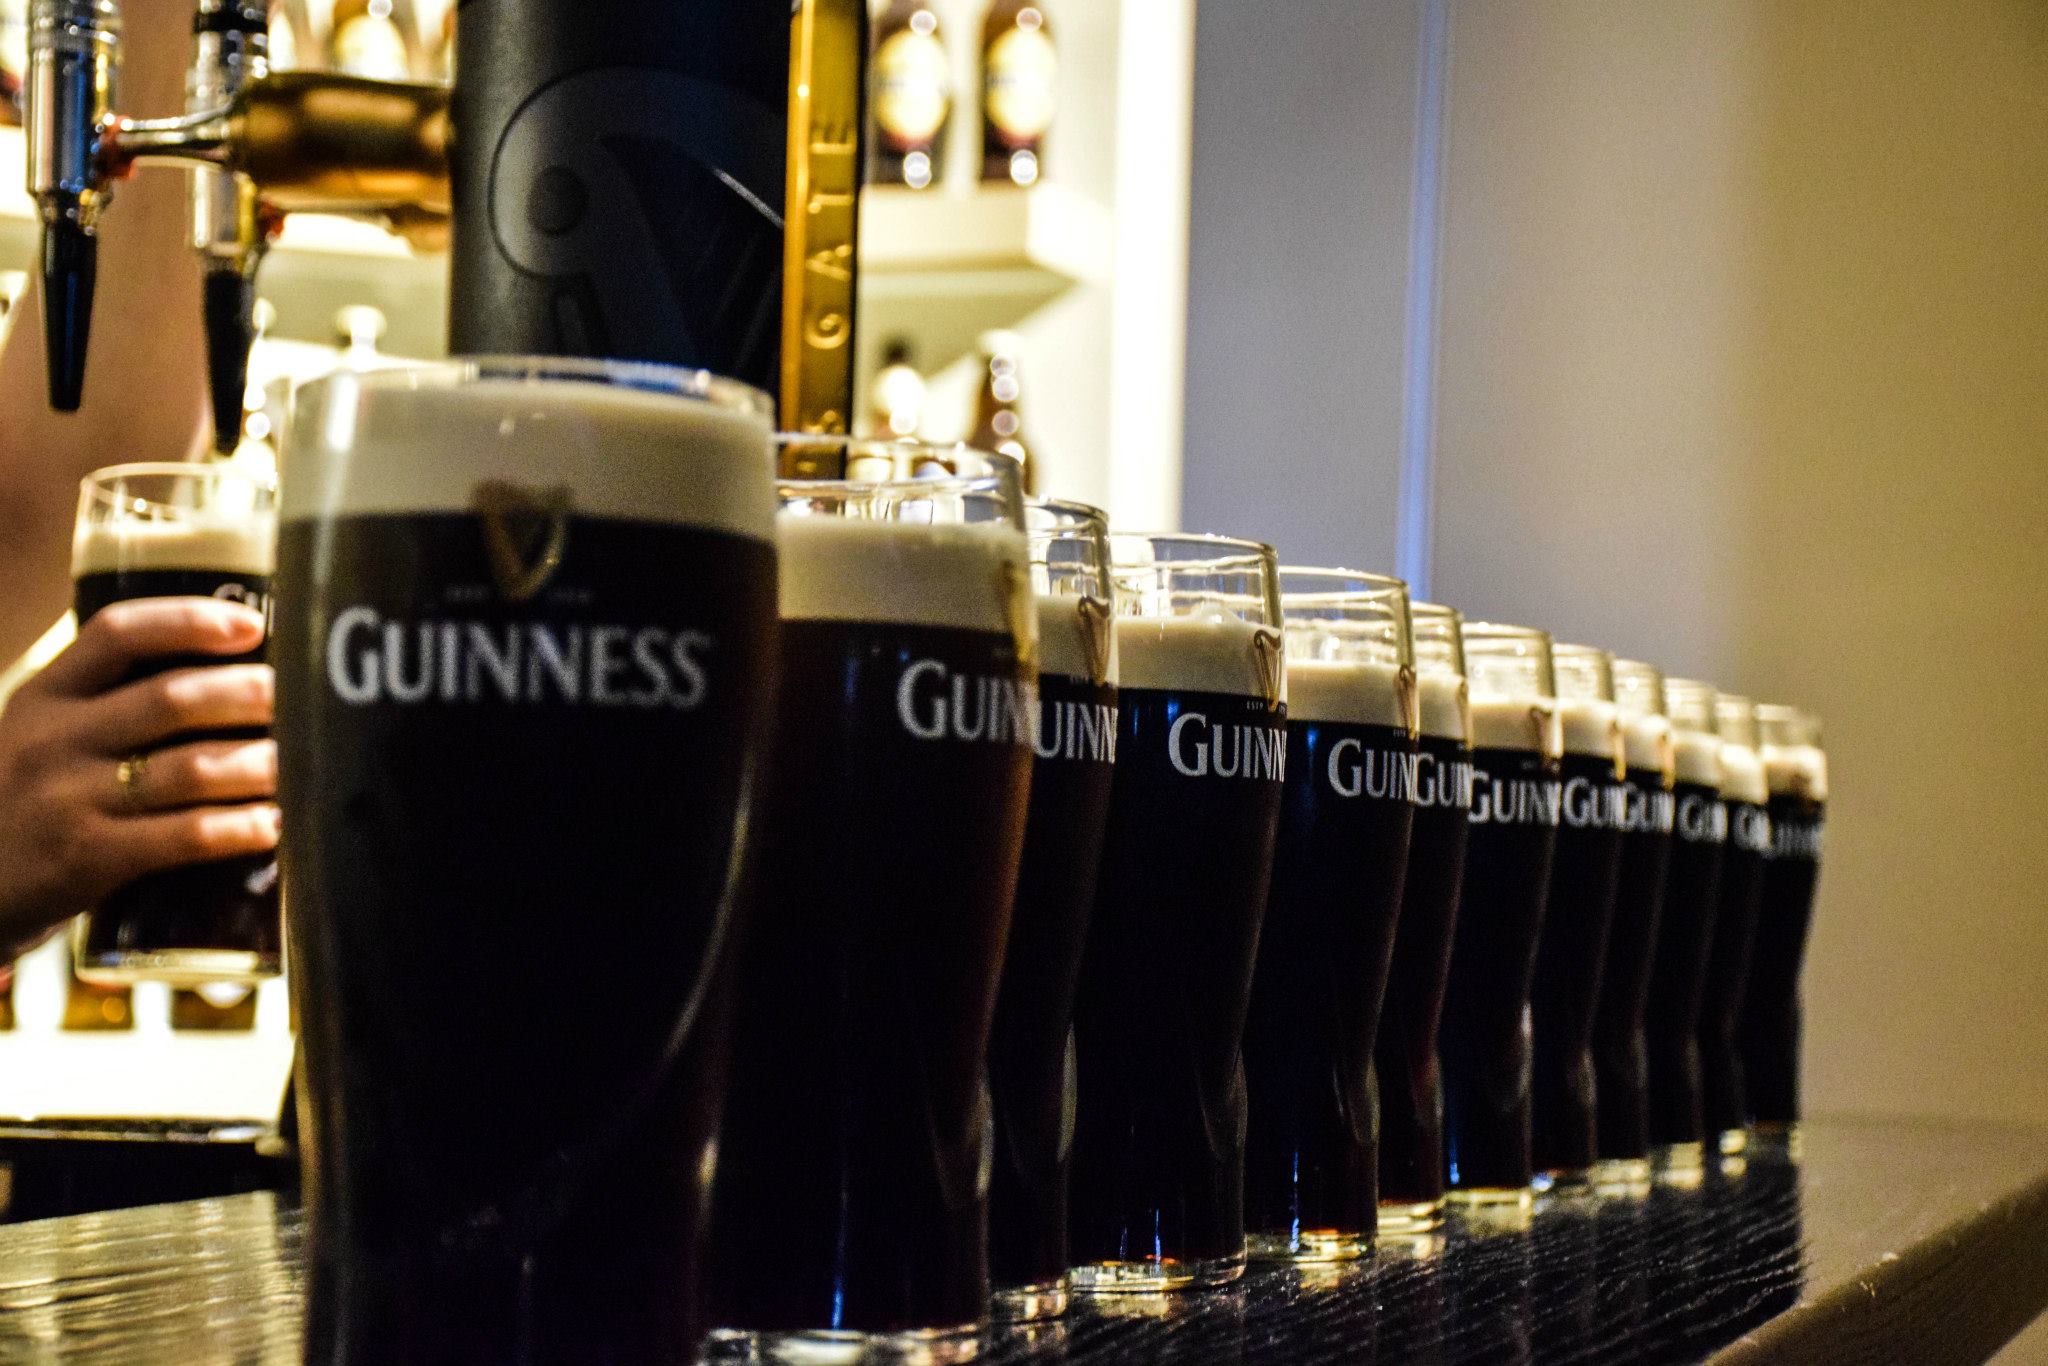 row of Guinness beers